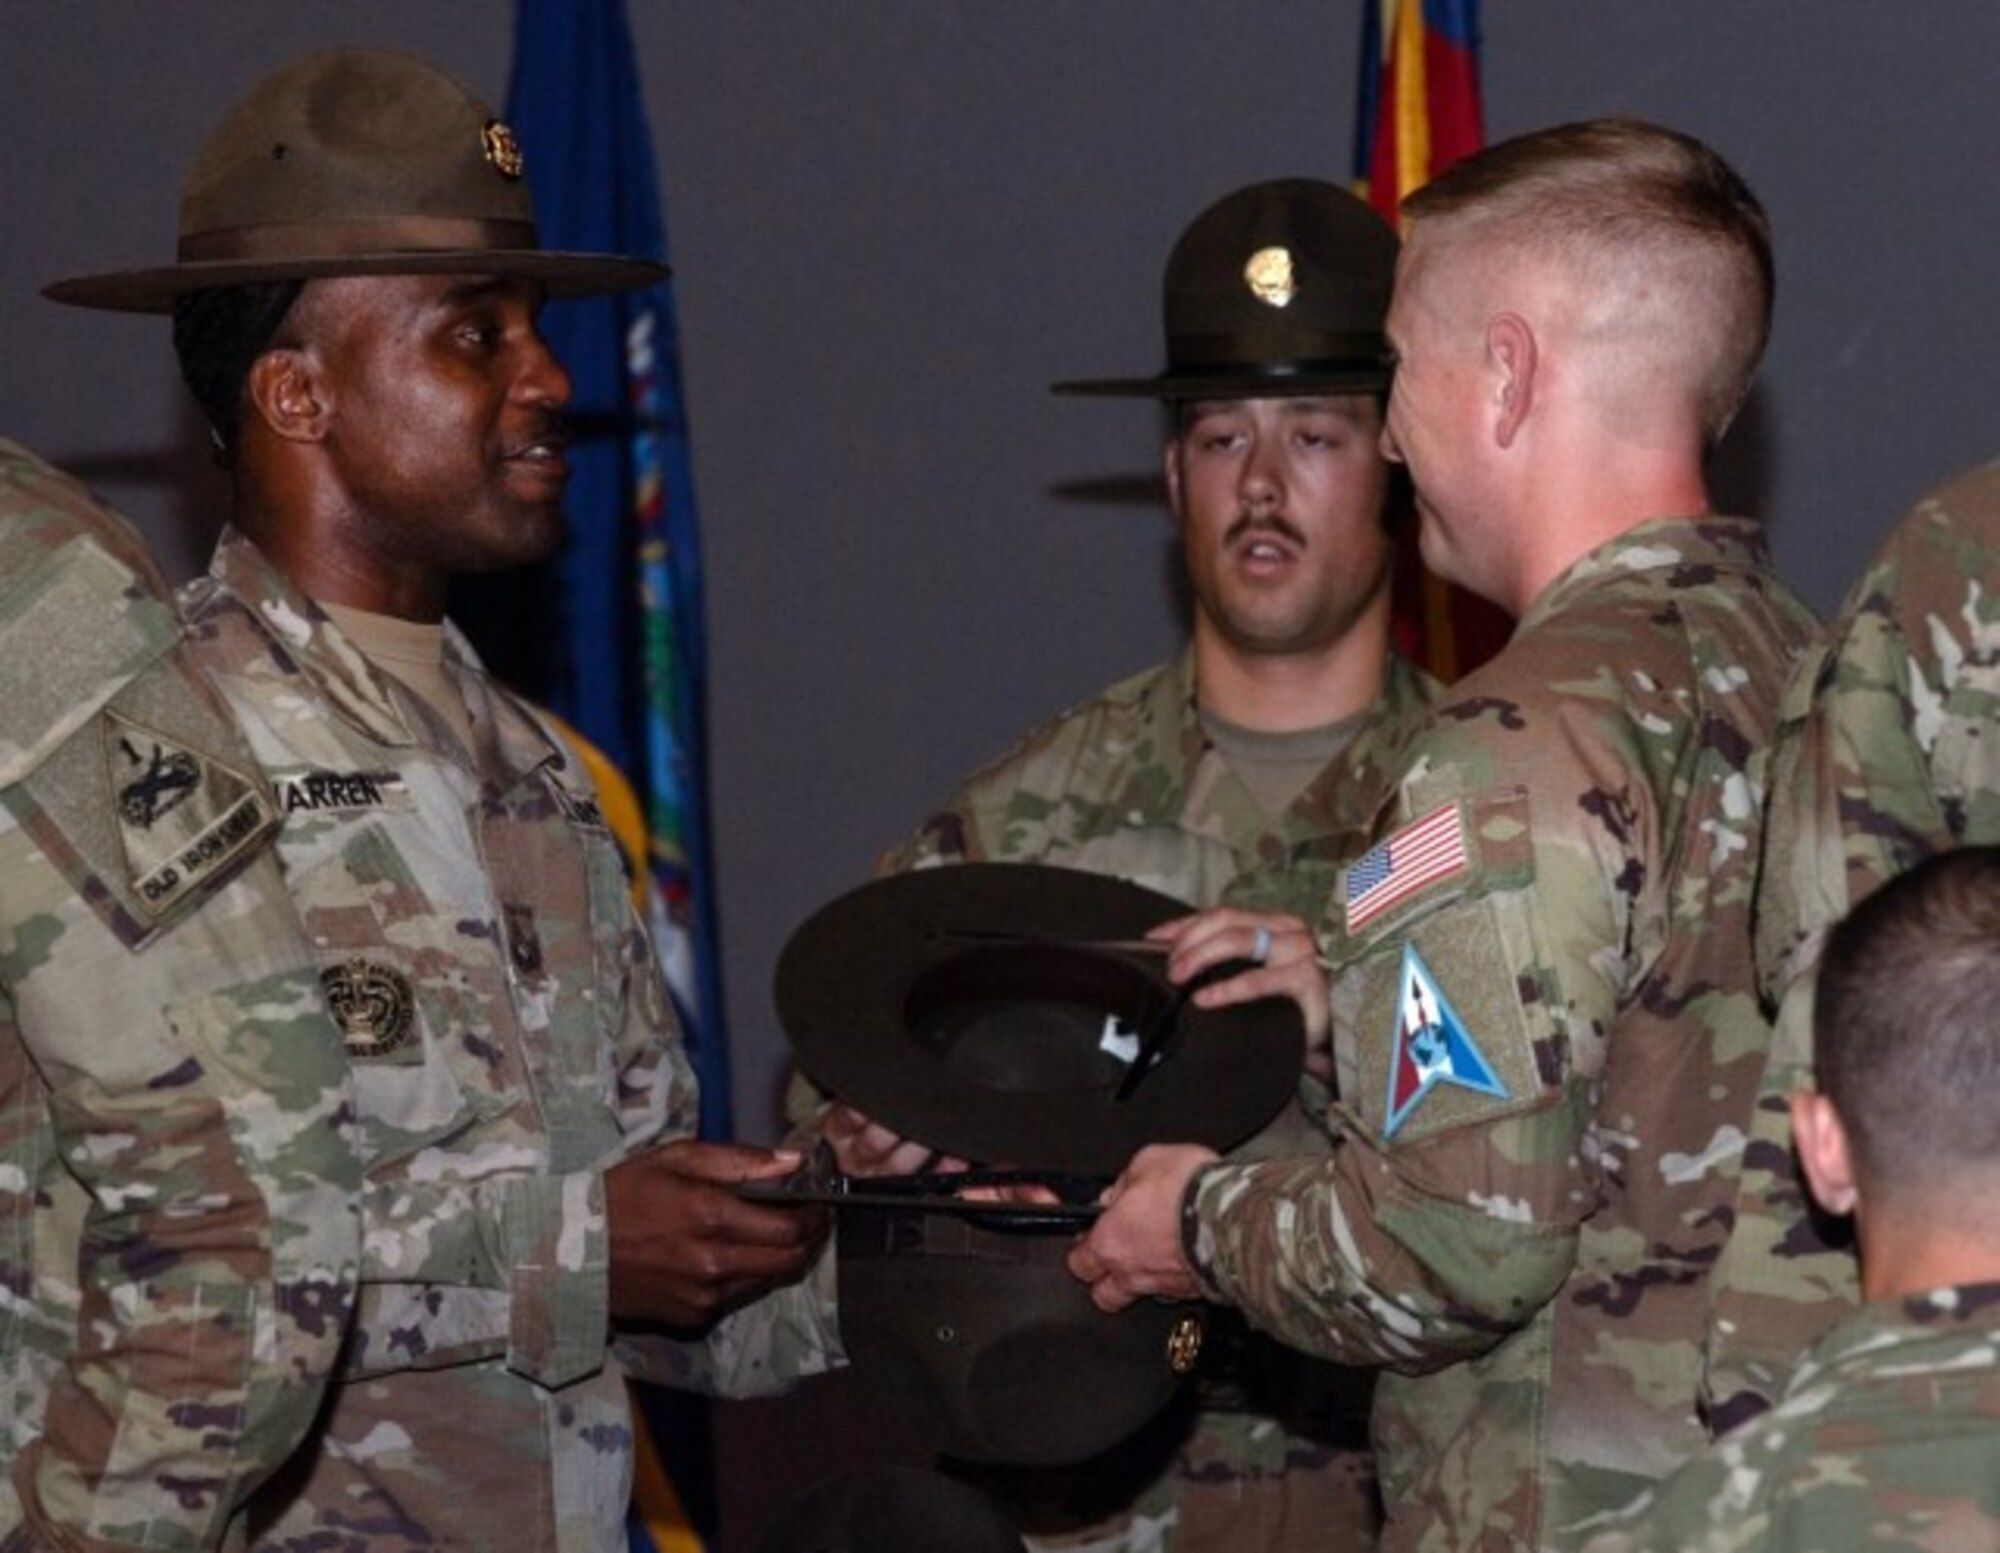 U.S. Army Sgt. 1st Class Sytoi K. Warren, senior drill sergeant leader, presents Space Force Tech Sgt. David P. Gudgeon his drill sergeant hat during a graduation ceremony at the U.S. Army Drill Sergeant Academy in Fort Jackson, S.C., April 3, 2024. Gudgeon, along with Sgt. Yuji Moore, were the first Guardians to graduate from the school. (U.S. Army photo by Robert Timmons)